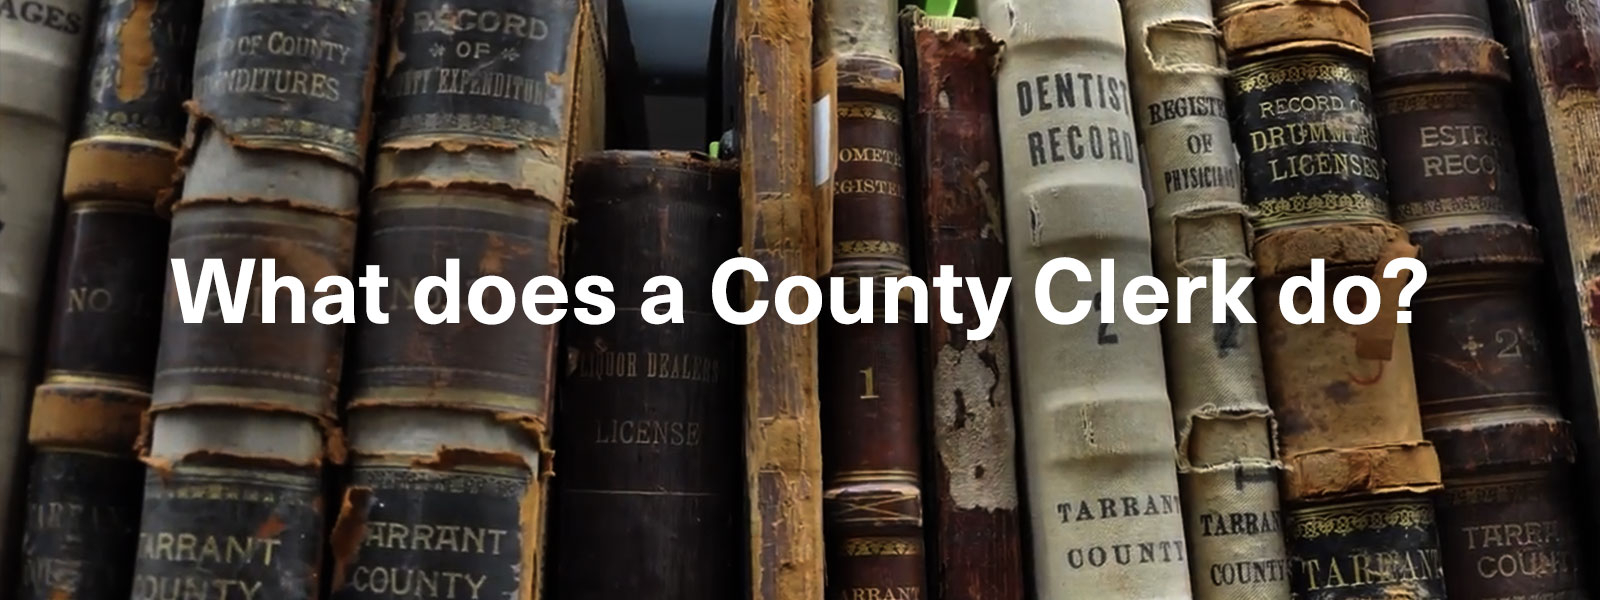 What does a County Clerk do?